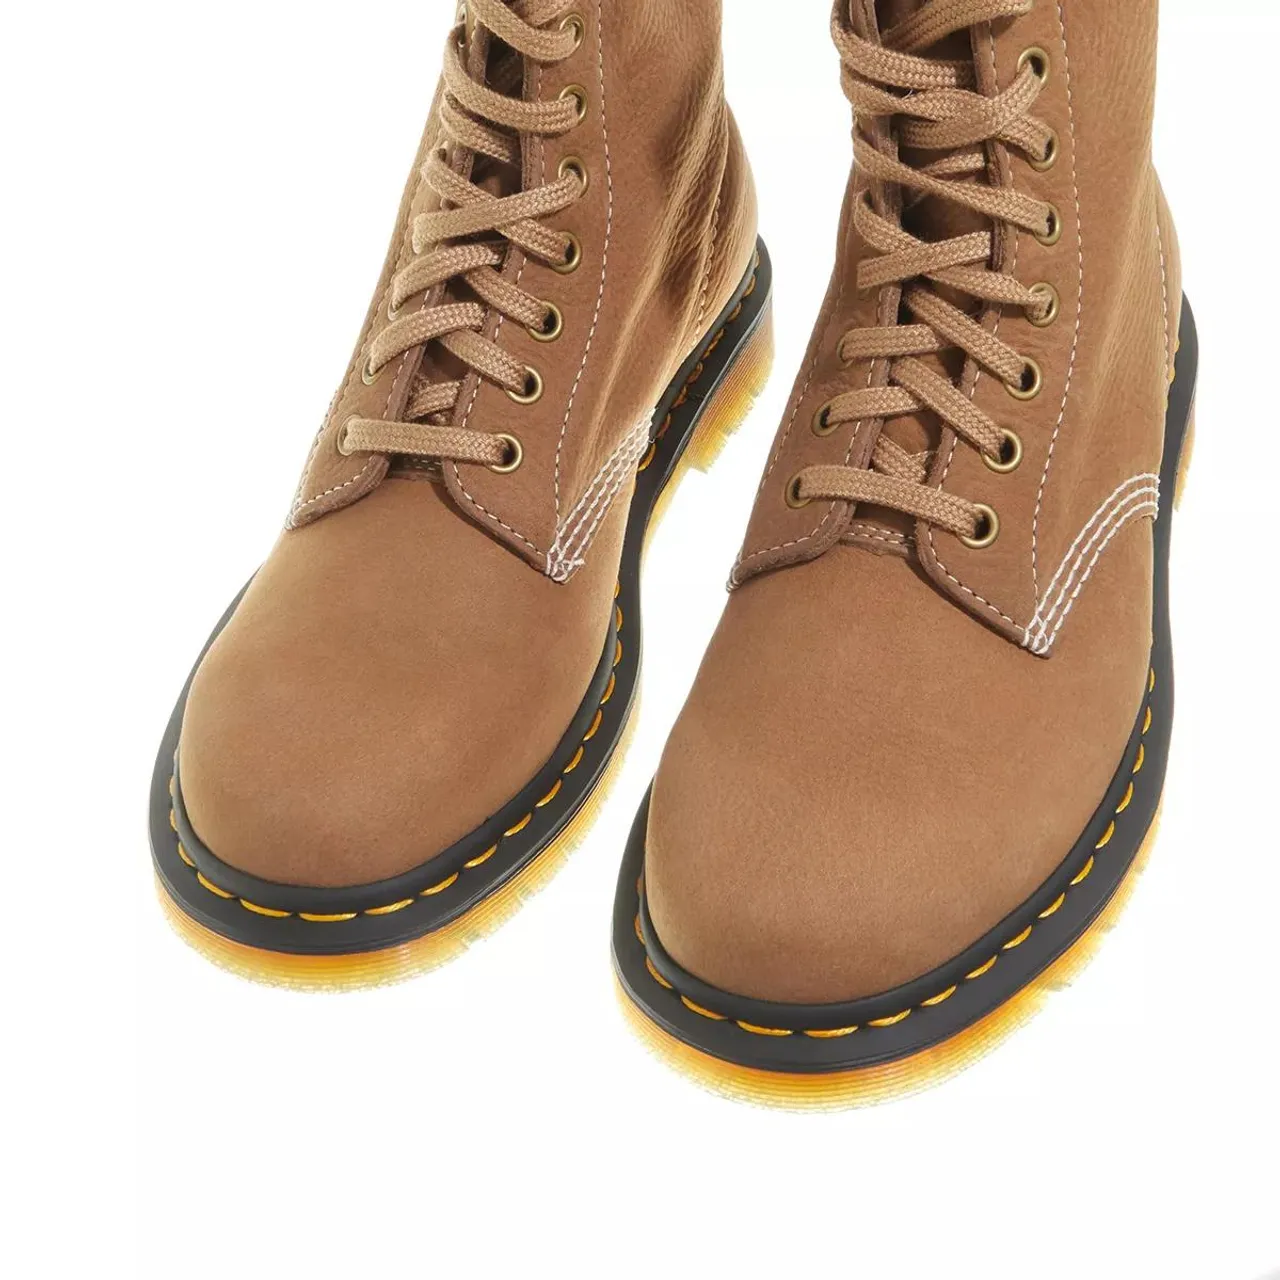 Dr. Martens Boots & Ankle Boots - 8 Eye Boot 1460 - beige - Boots & Ankle Boots for ladies